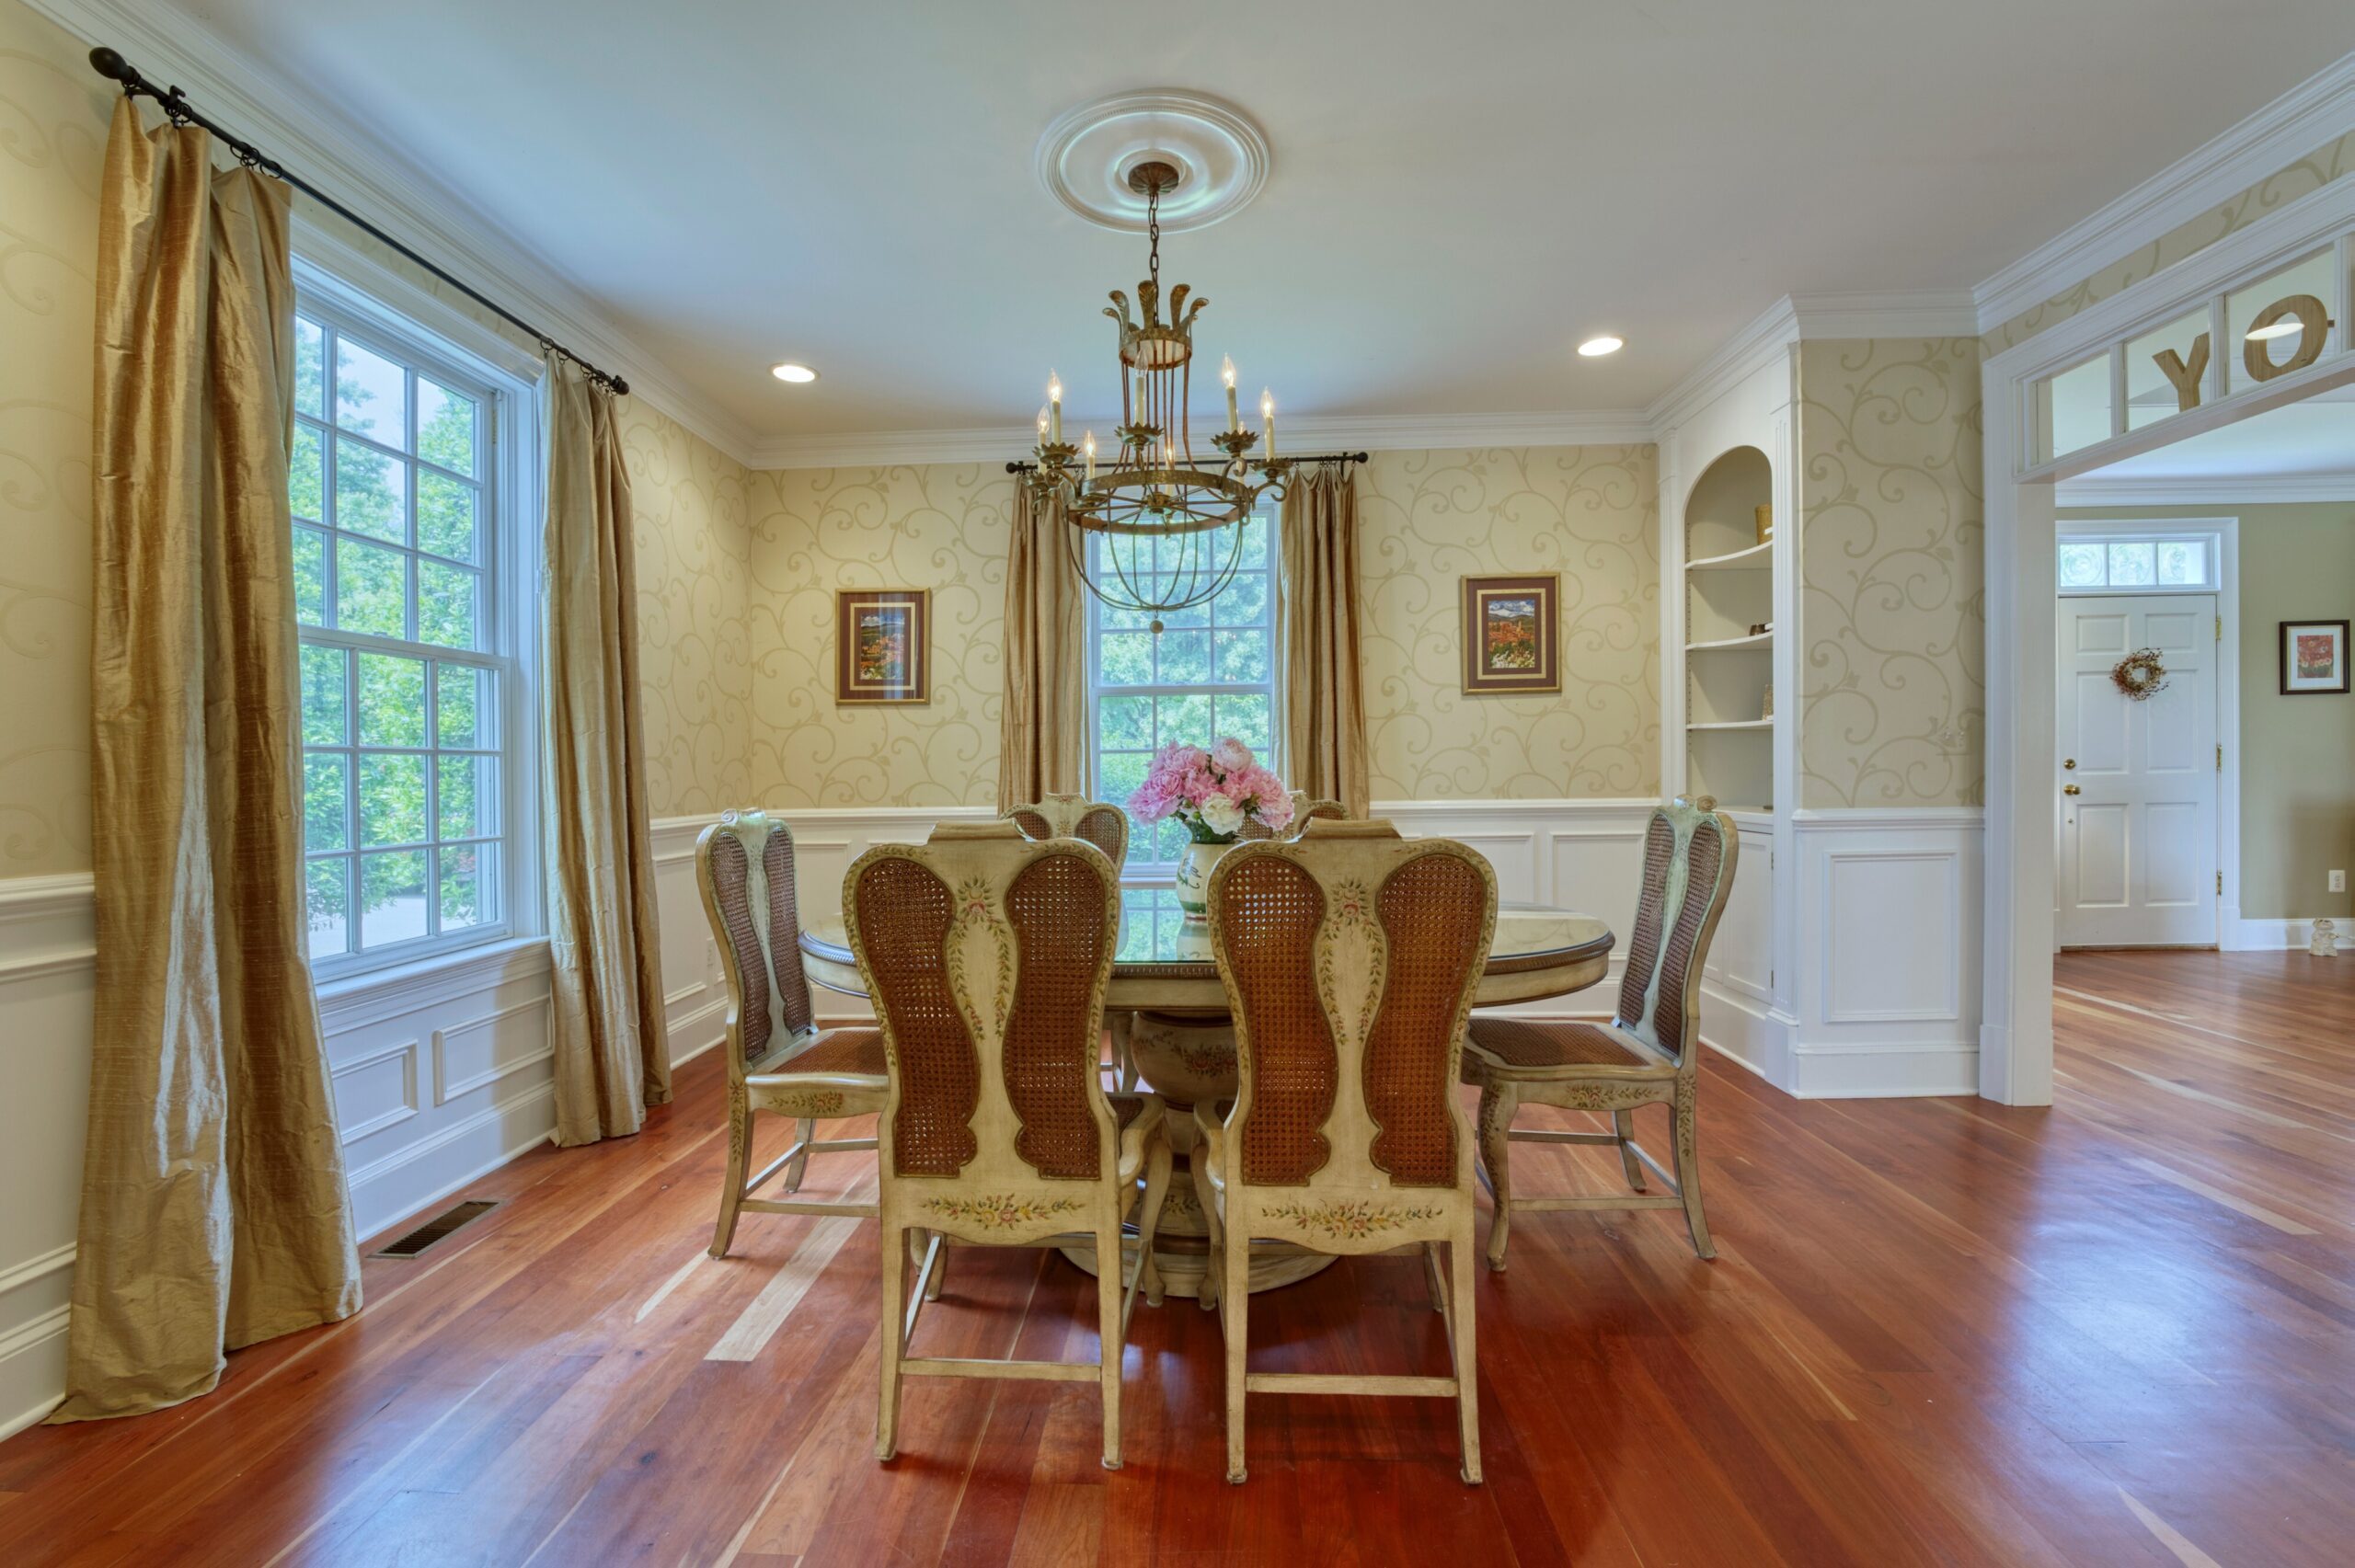 Professional interior photo of 15203 Clover Hill Road - showing the formal dining room with chandelier and cherry floors